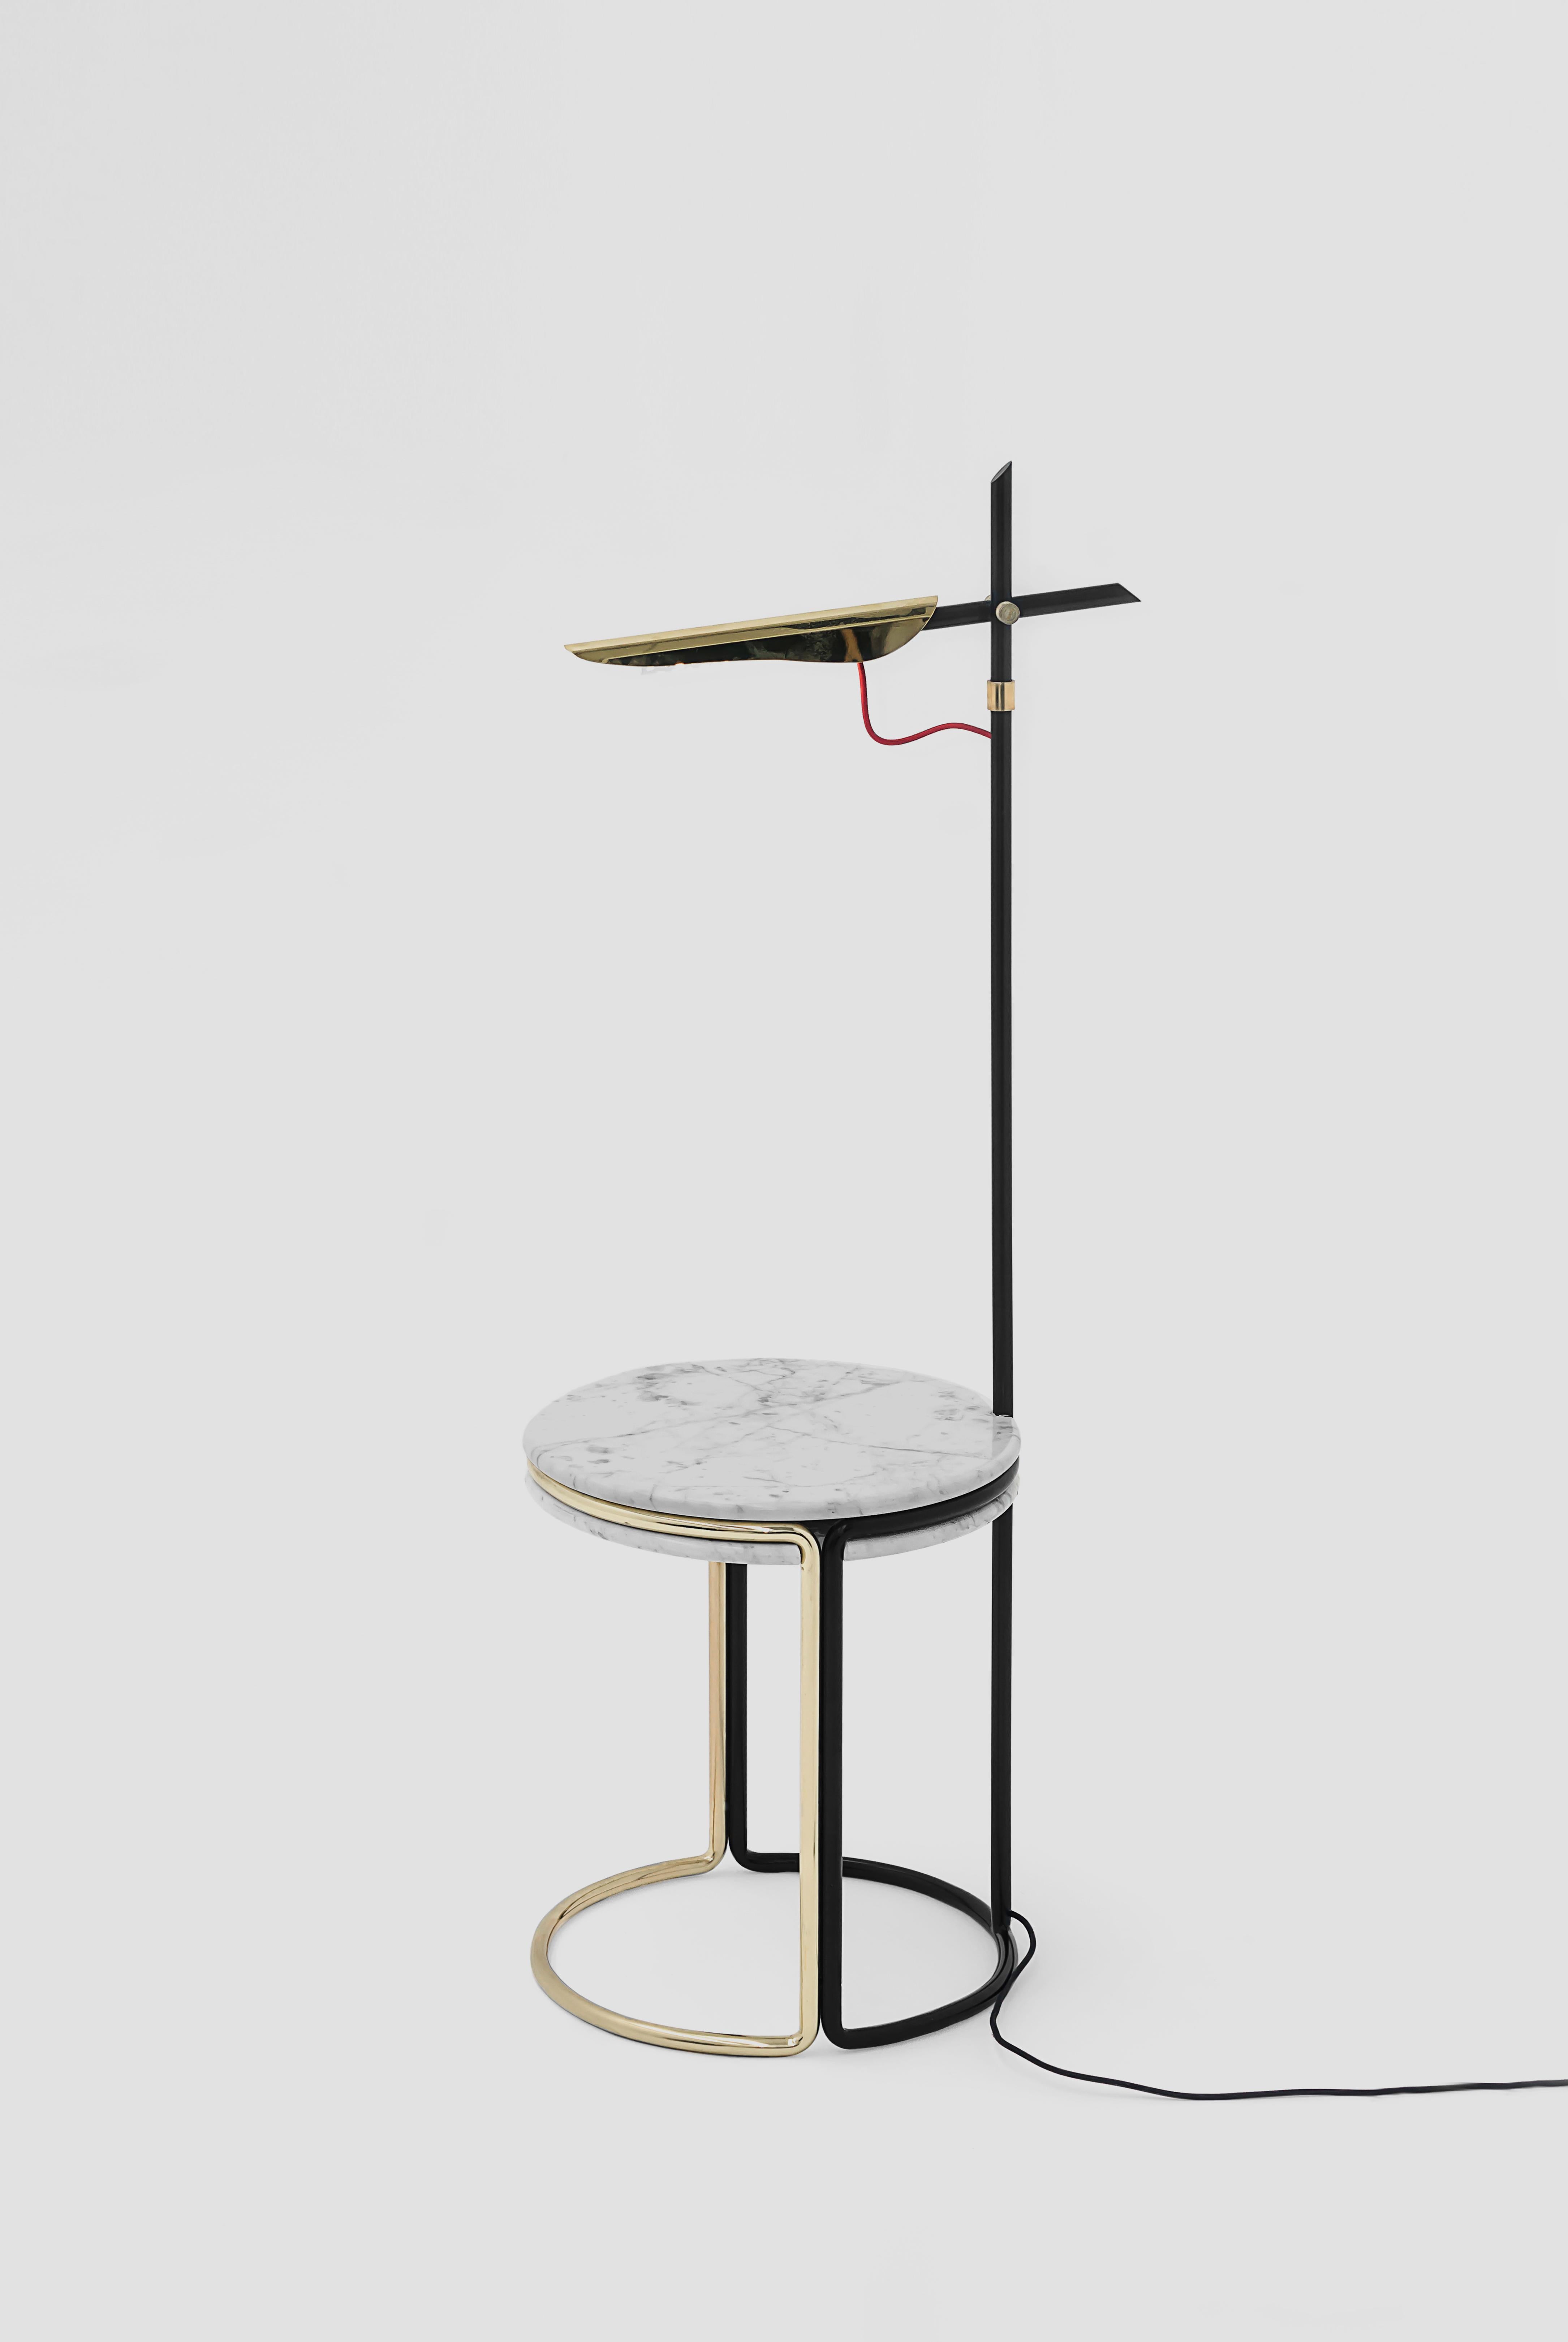 Lea side table by Germán Velasco
Dimensions: D 45 x H 140 cm
Materials: steel, Calcatta marble.

Auxiliary reading table made of Calacatta marble, steel and electrostatic paint.

Germán Velasco studied Architecture at the Universidad